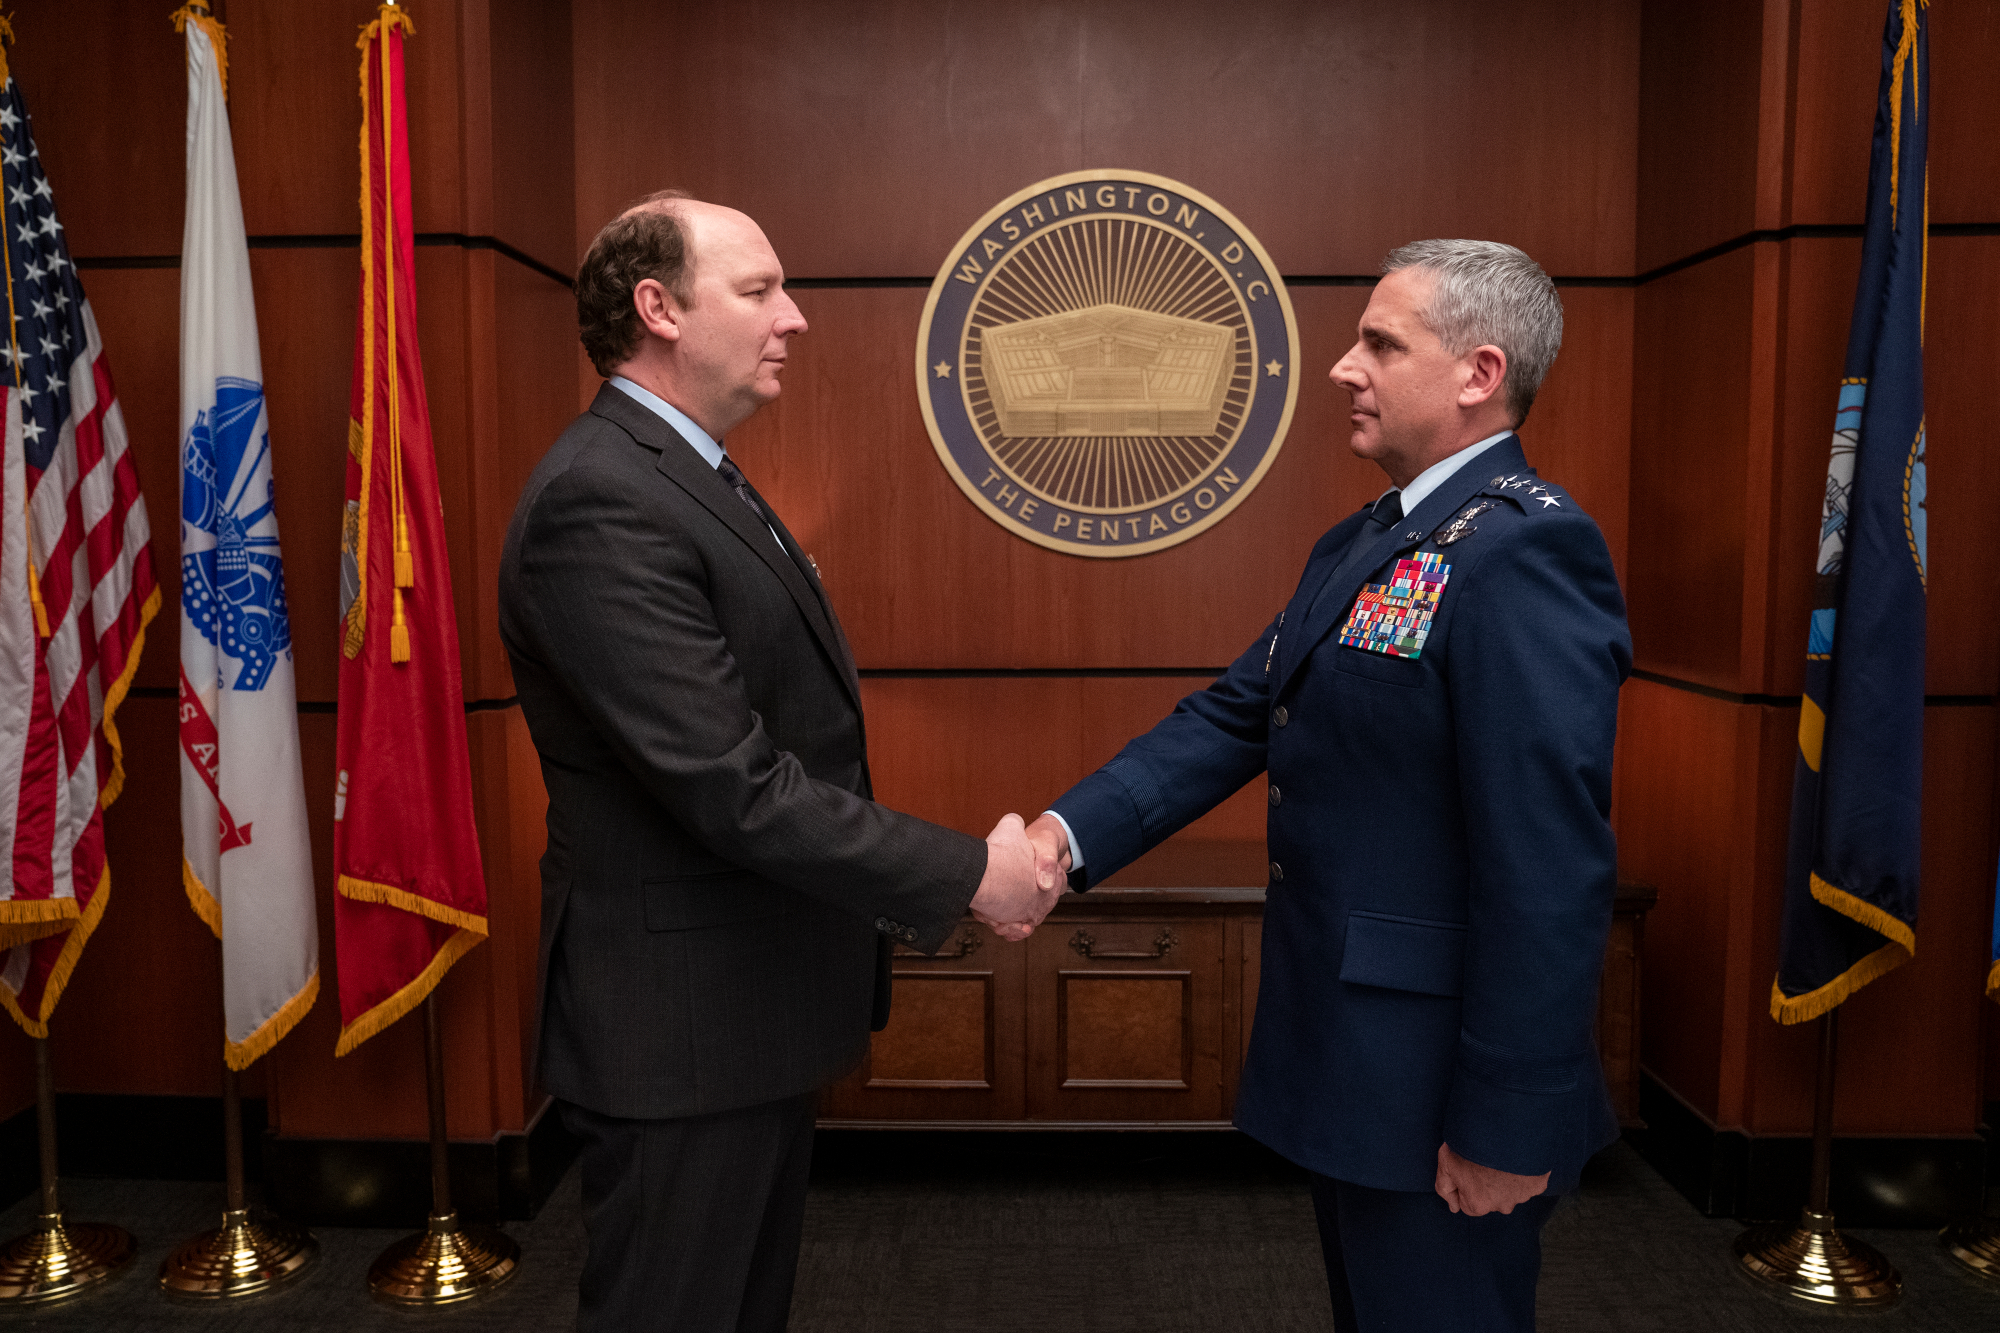 Dan Bakkedahl and Steve Carell in Netflix's 'Space Force' show, which was canceled in 2022. The two are shaking hands.